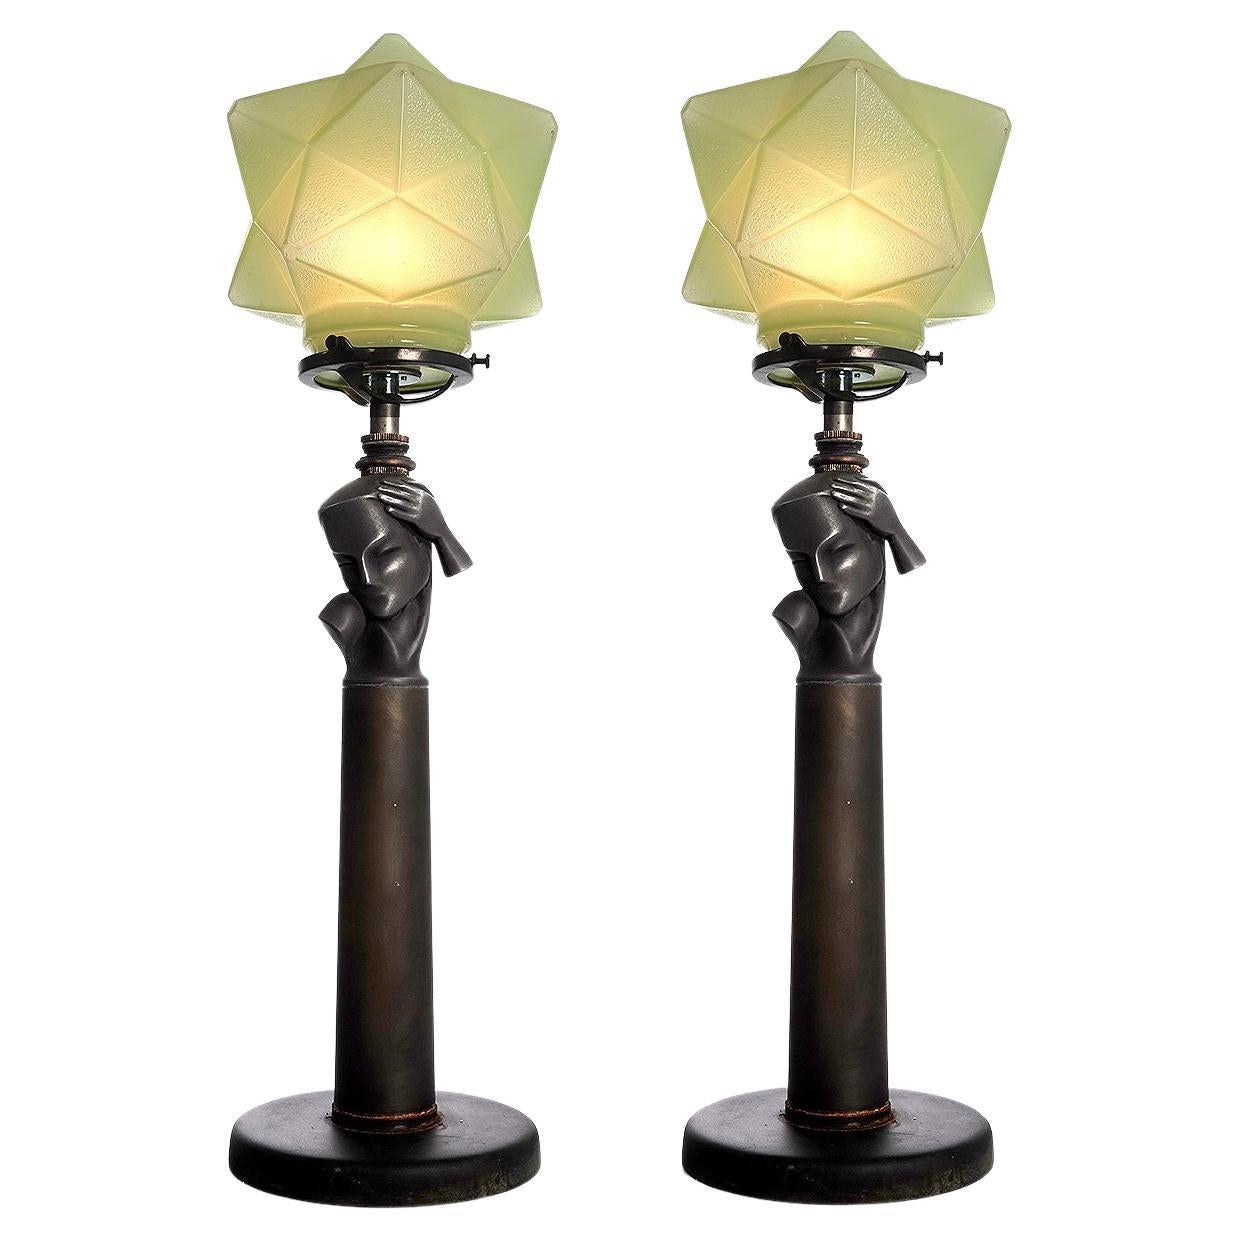 Matching Pair of High Style Art Deco Table Lamps